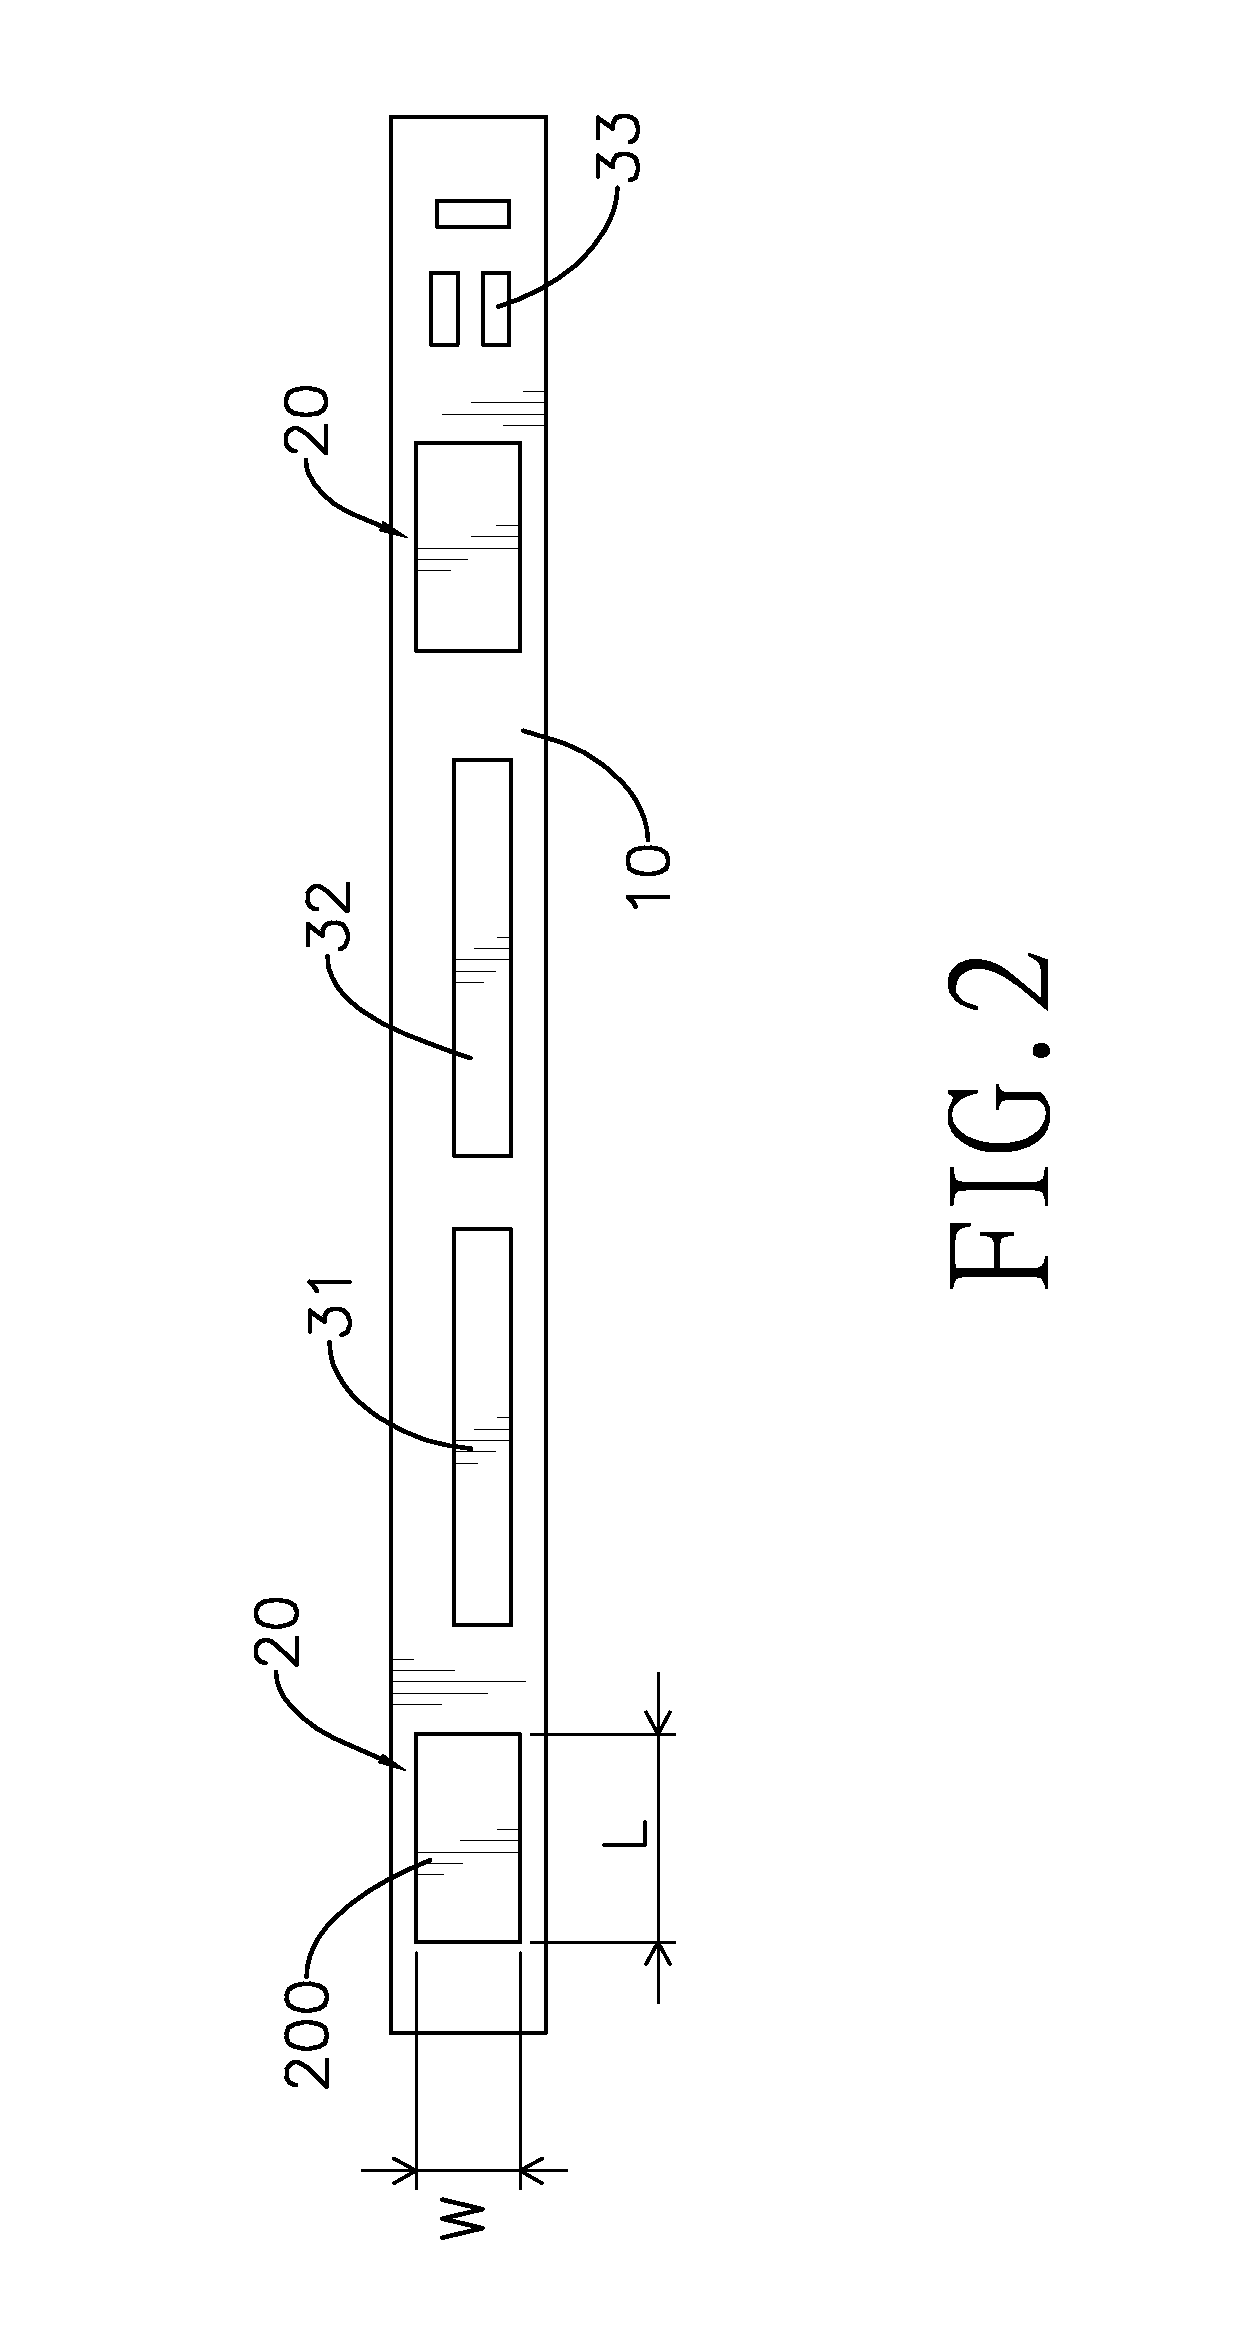 Screen control module of a mobile electronic device and controller thereof with multiple dielectric layers